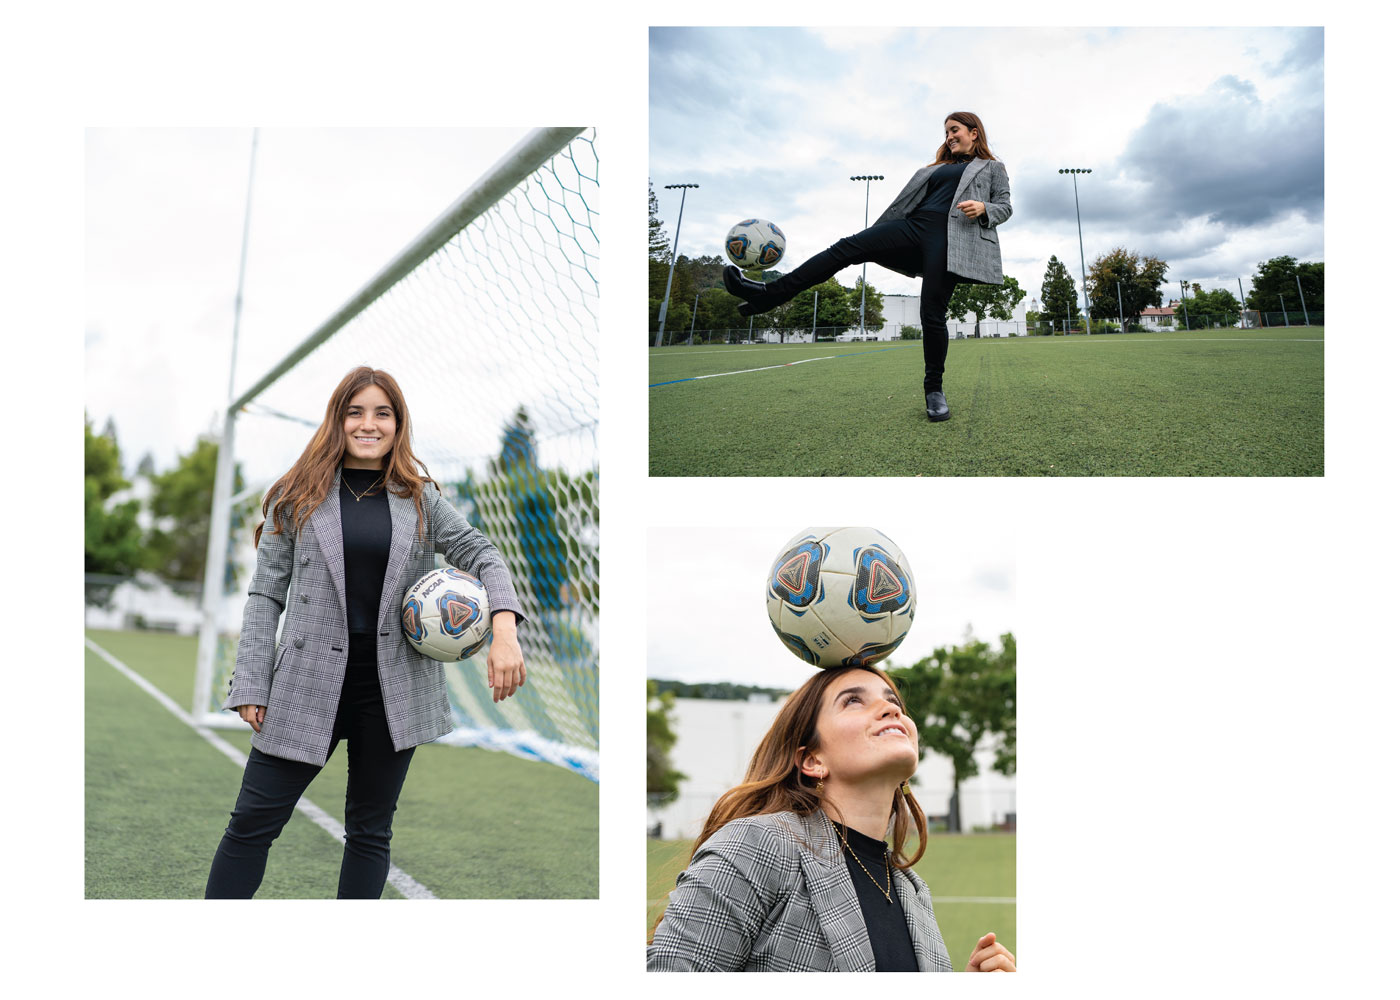 A student with a soccer ball wearing a suit in multiple formats